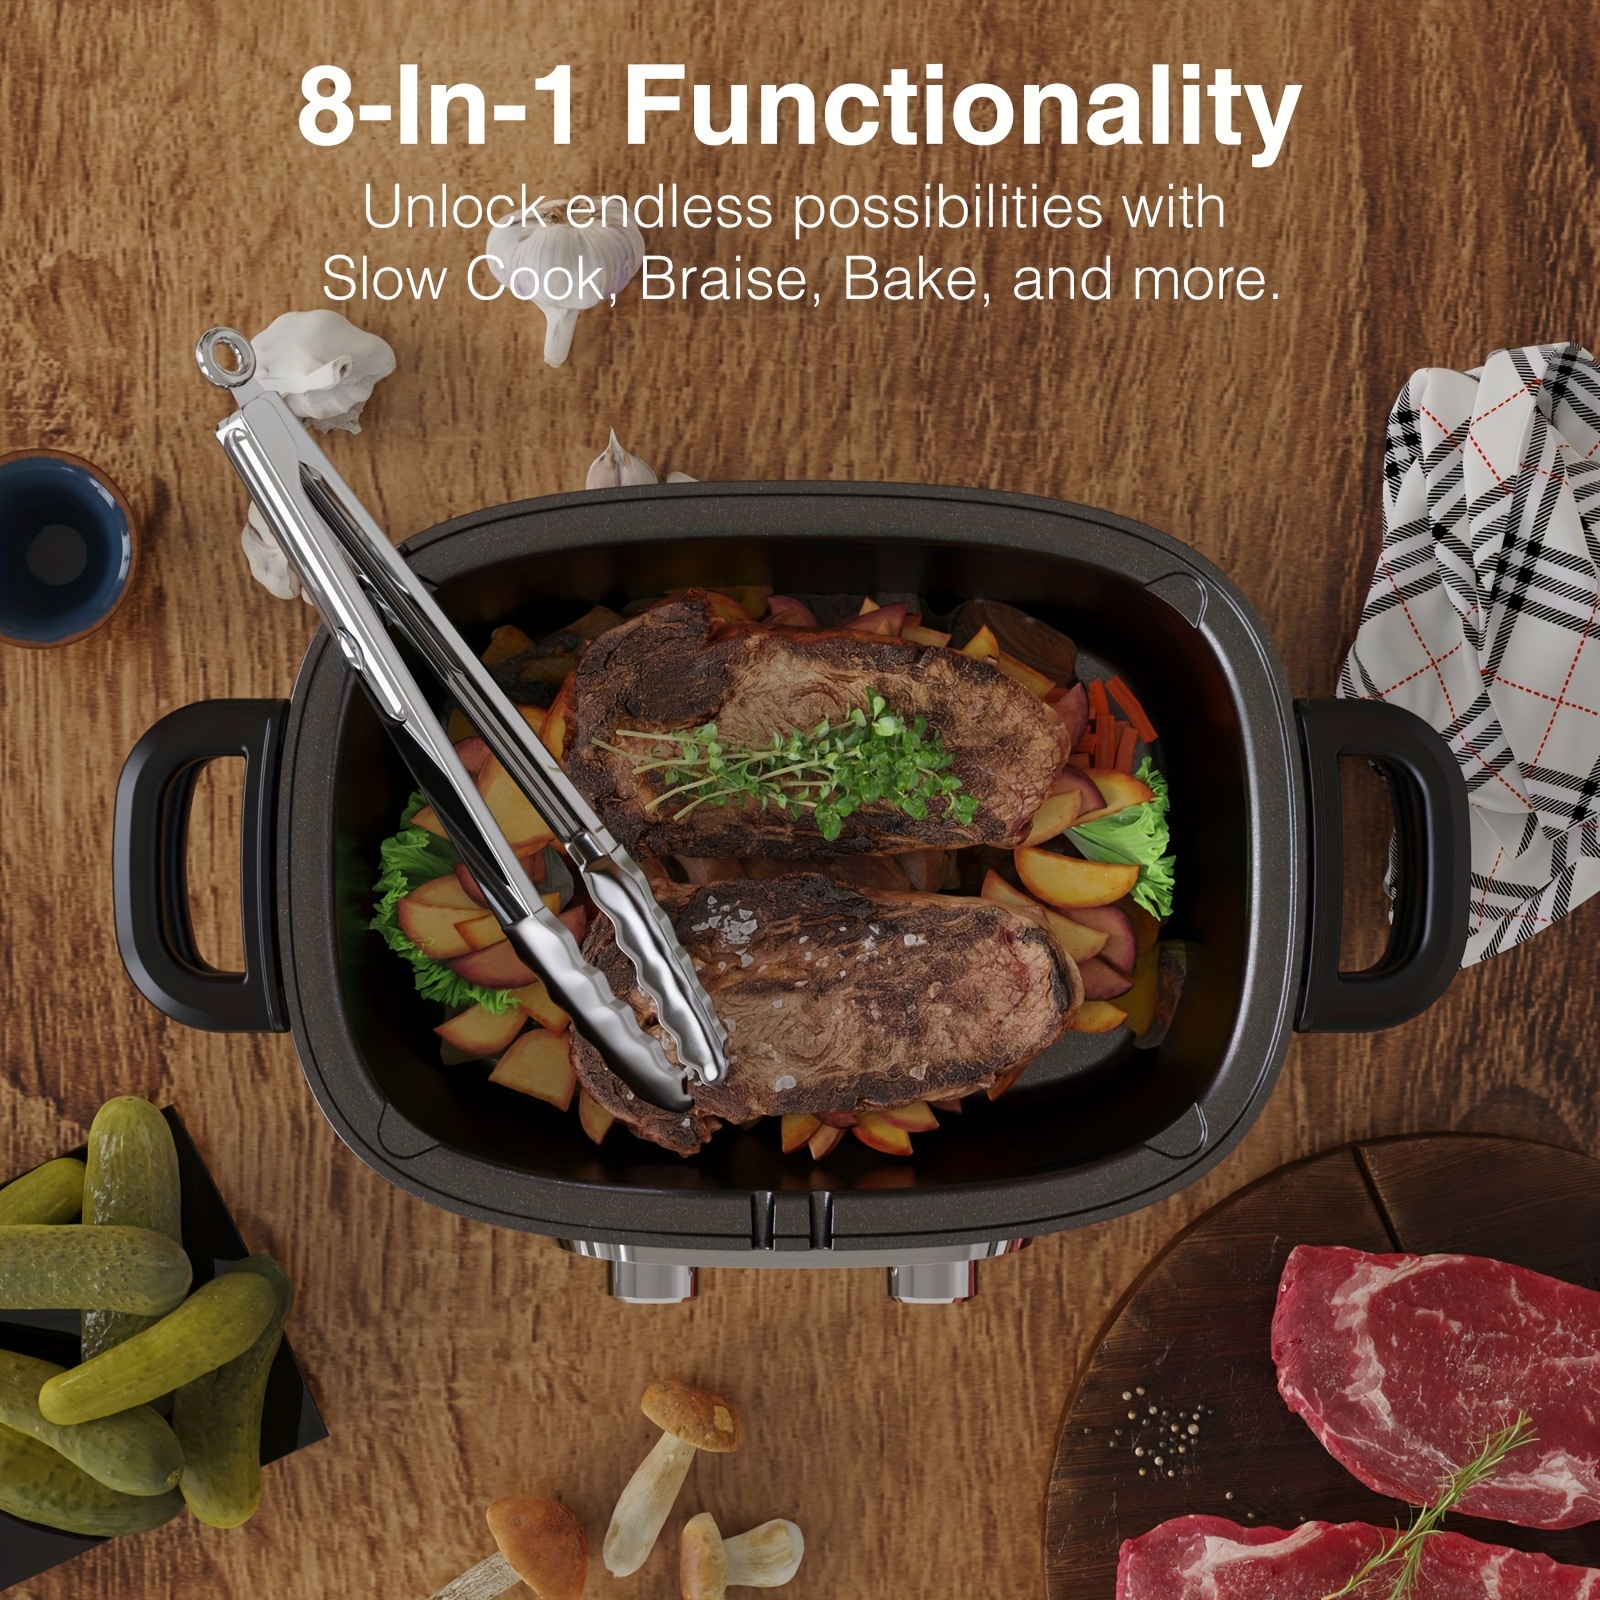 8-in-1 Multi-cooker, Programmable 6.8 Quart Slow Cooker, Presets